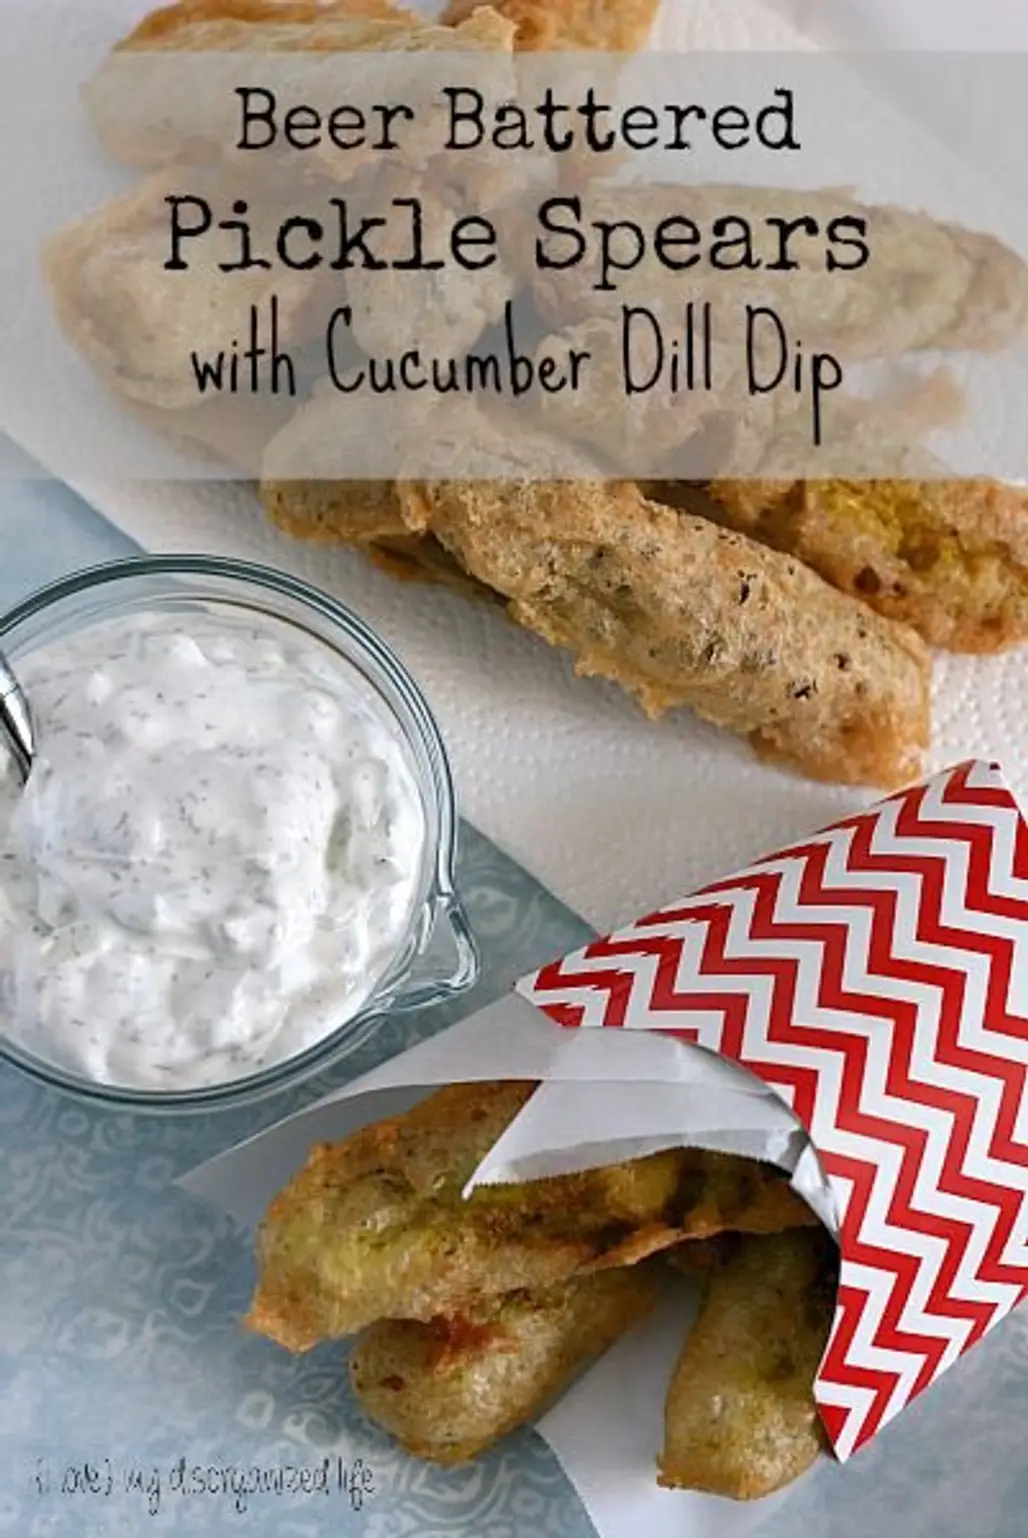 Beer Battered Pickle Spears with Cucumber Dill Dip